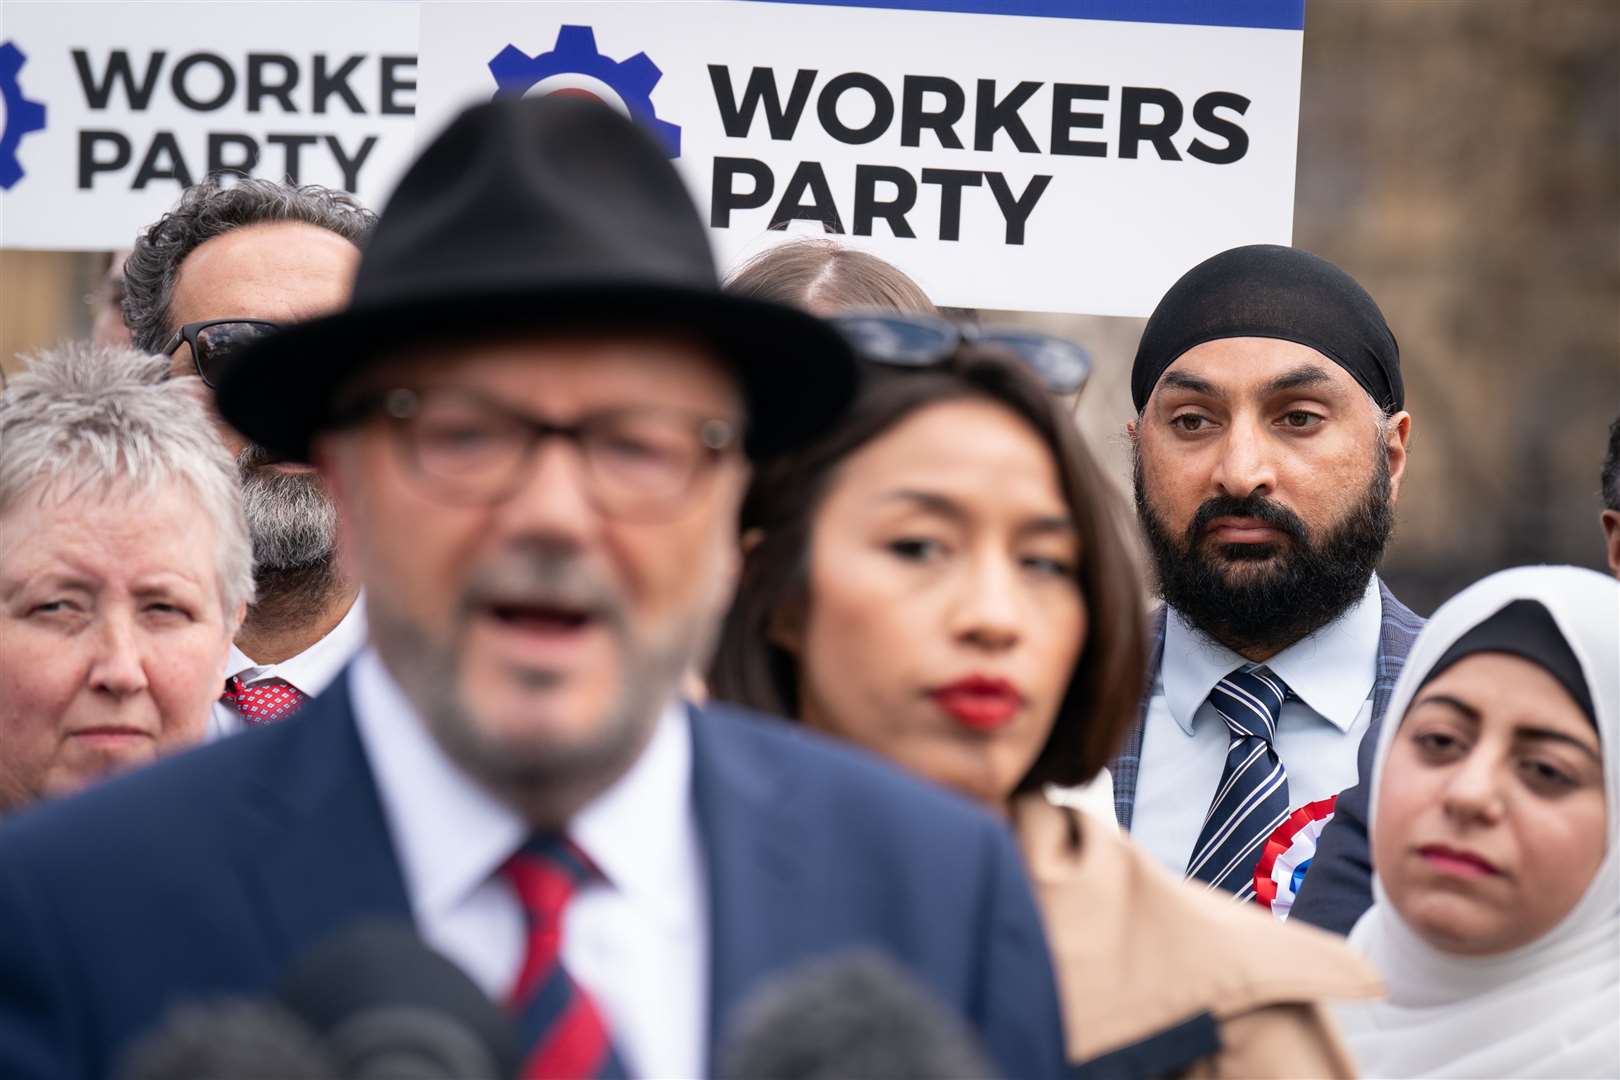 Monty Panesar, back right, said he did not think Labour was representing working-class people (Stefan Rousseau/PA)